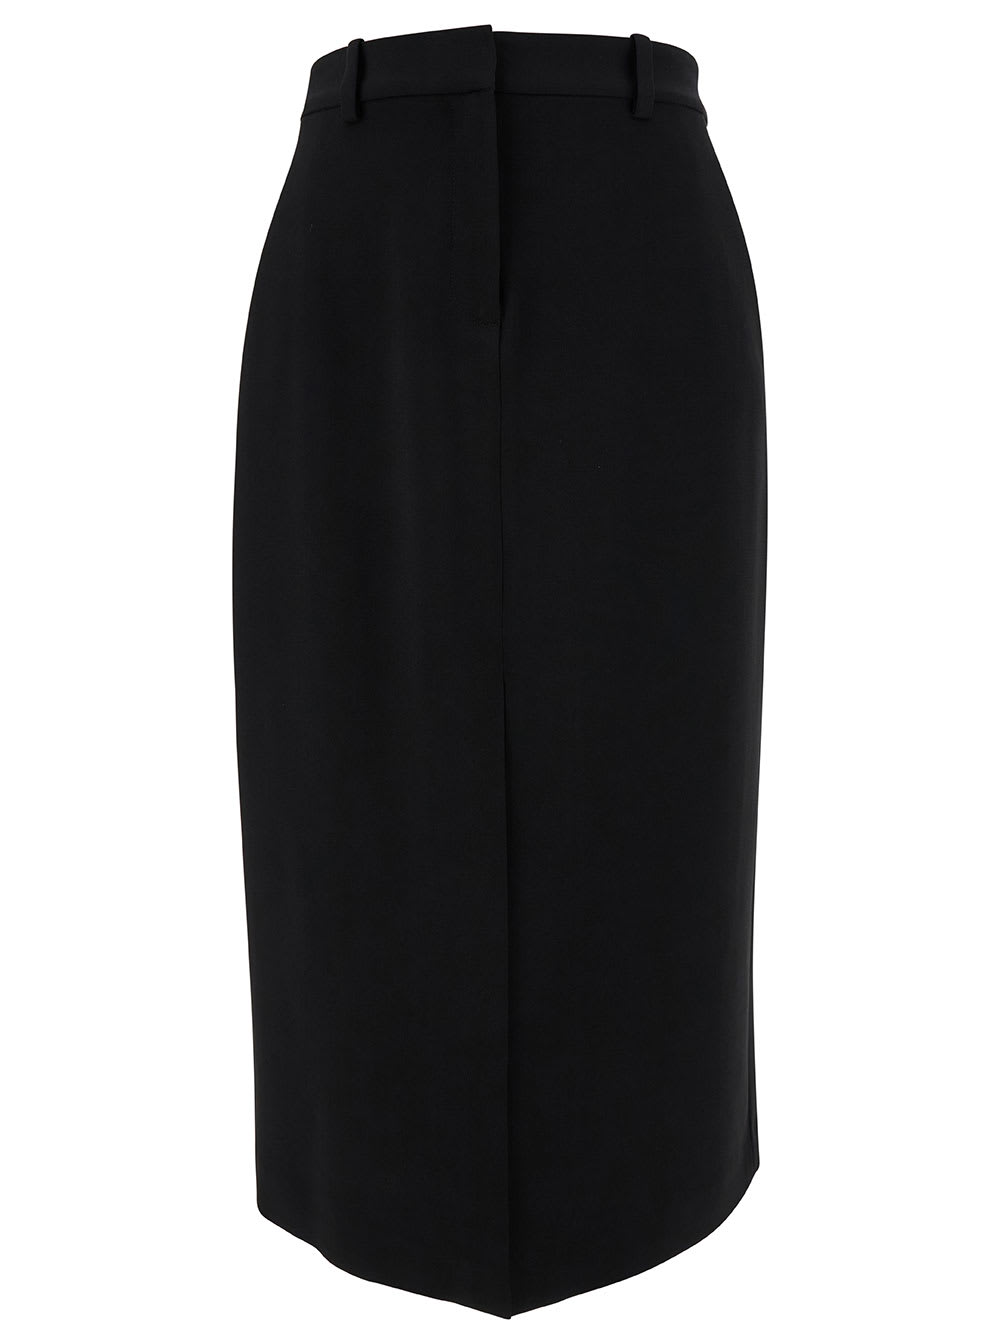 Midi Black Straight Skirt With Front Split In Triacetate Blend Woman